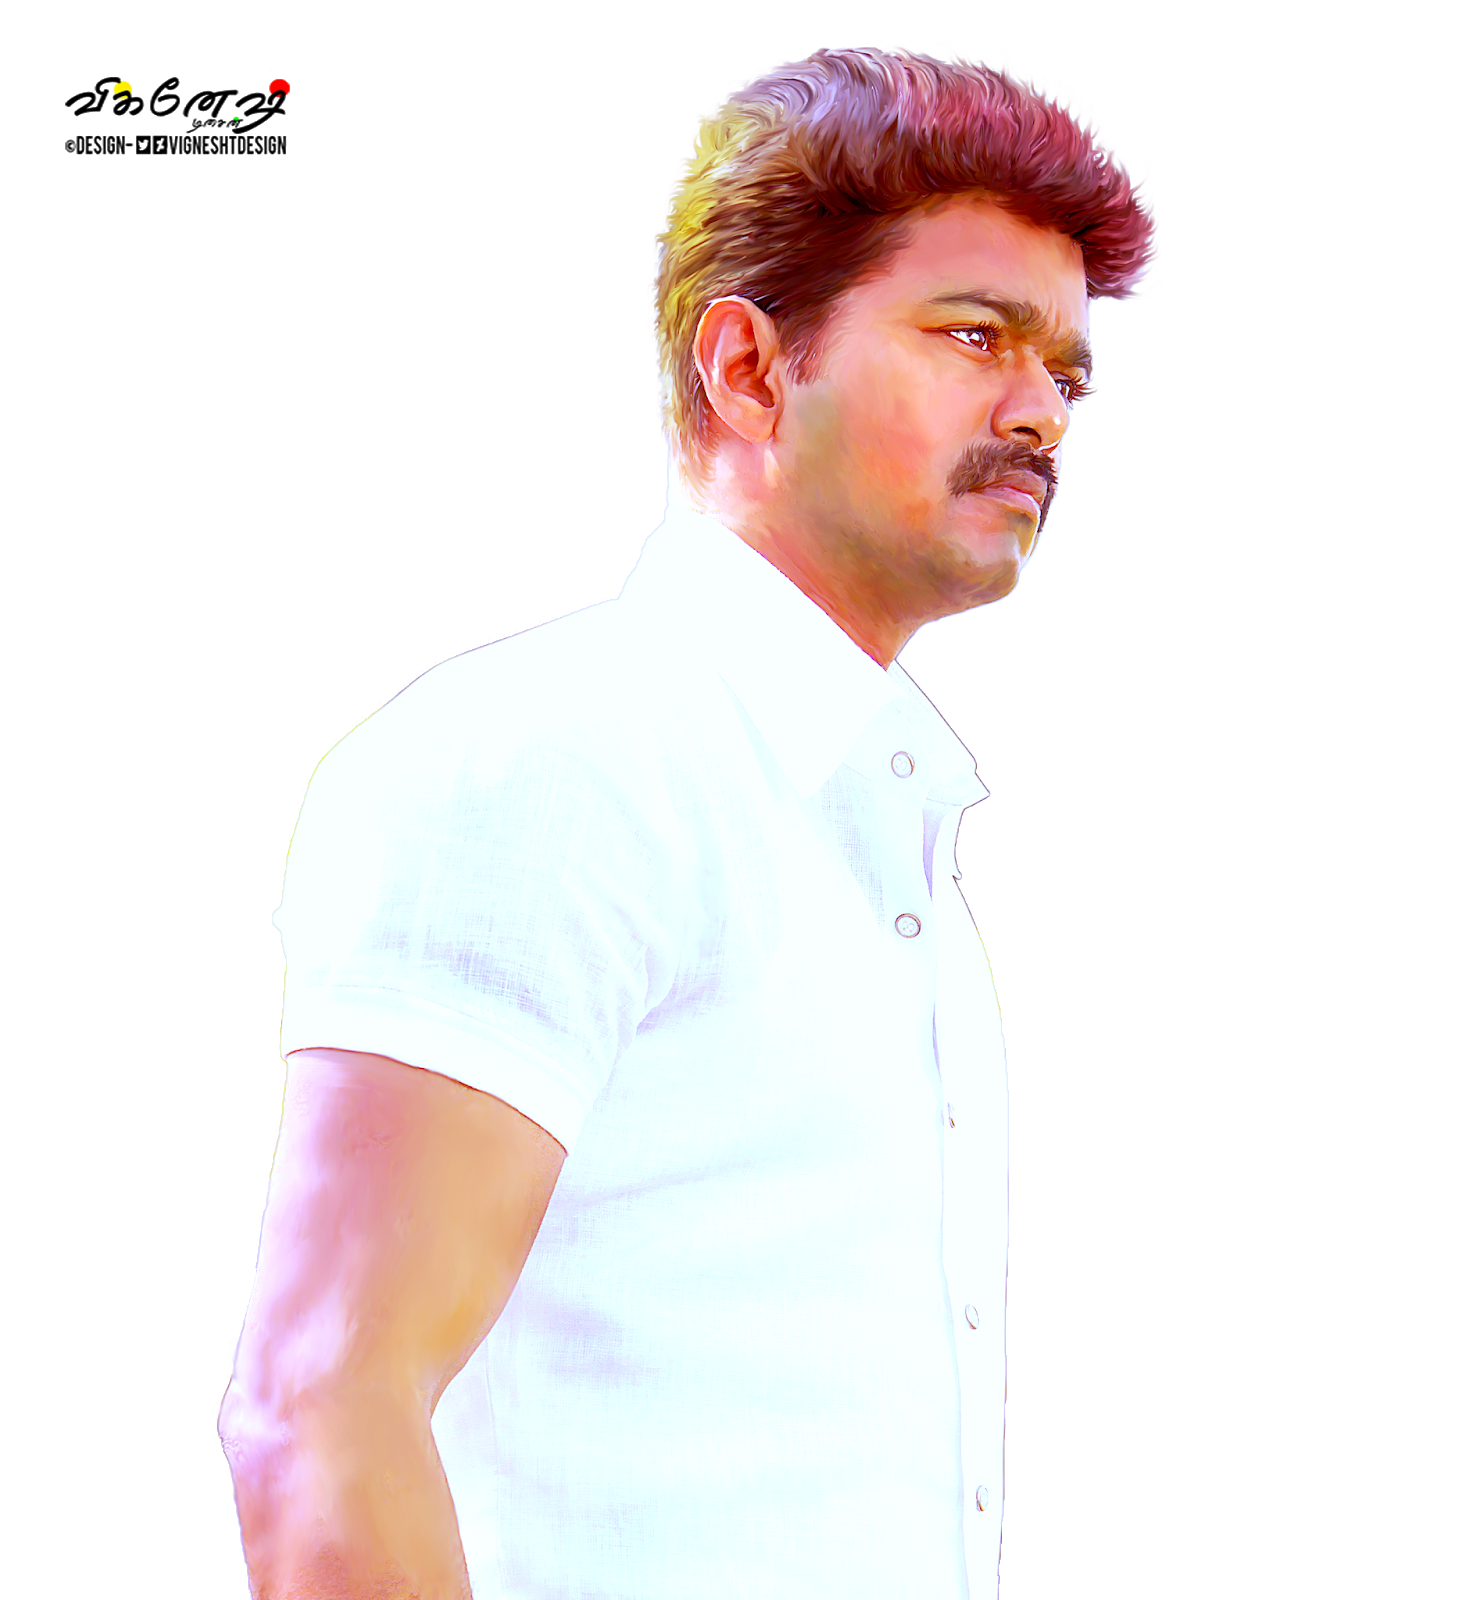 VIJAY ALL HD PICTURES: Vijay png images download.